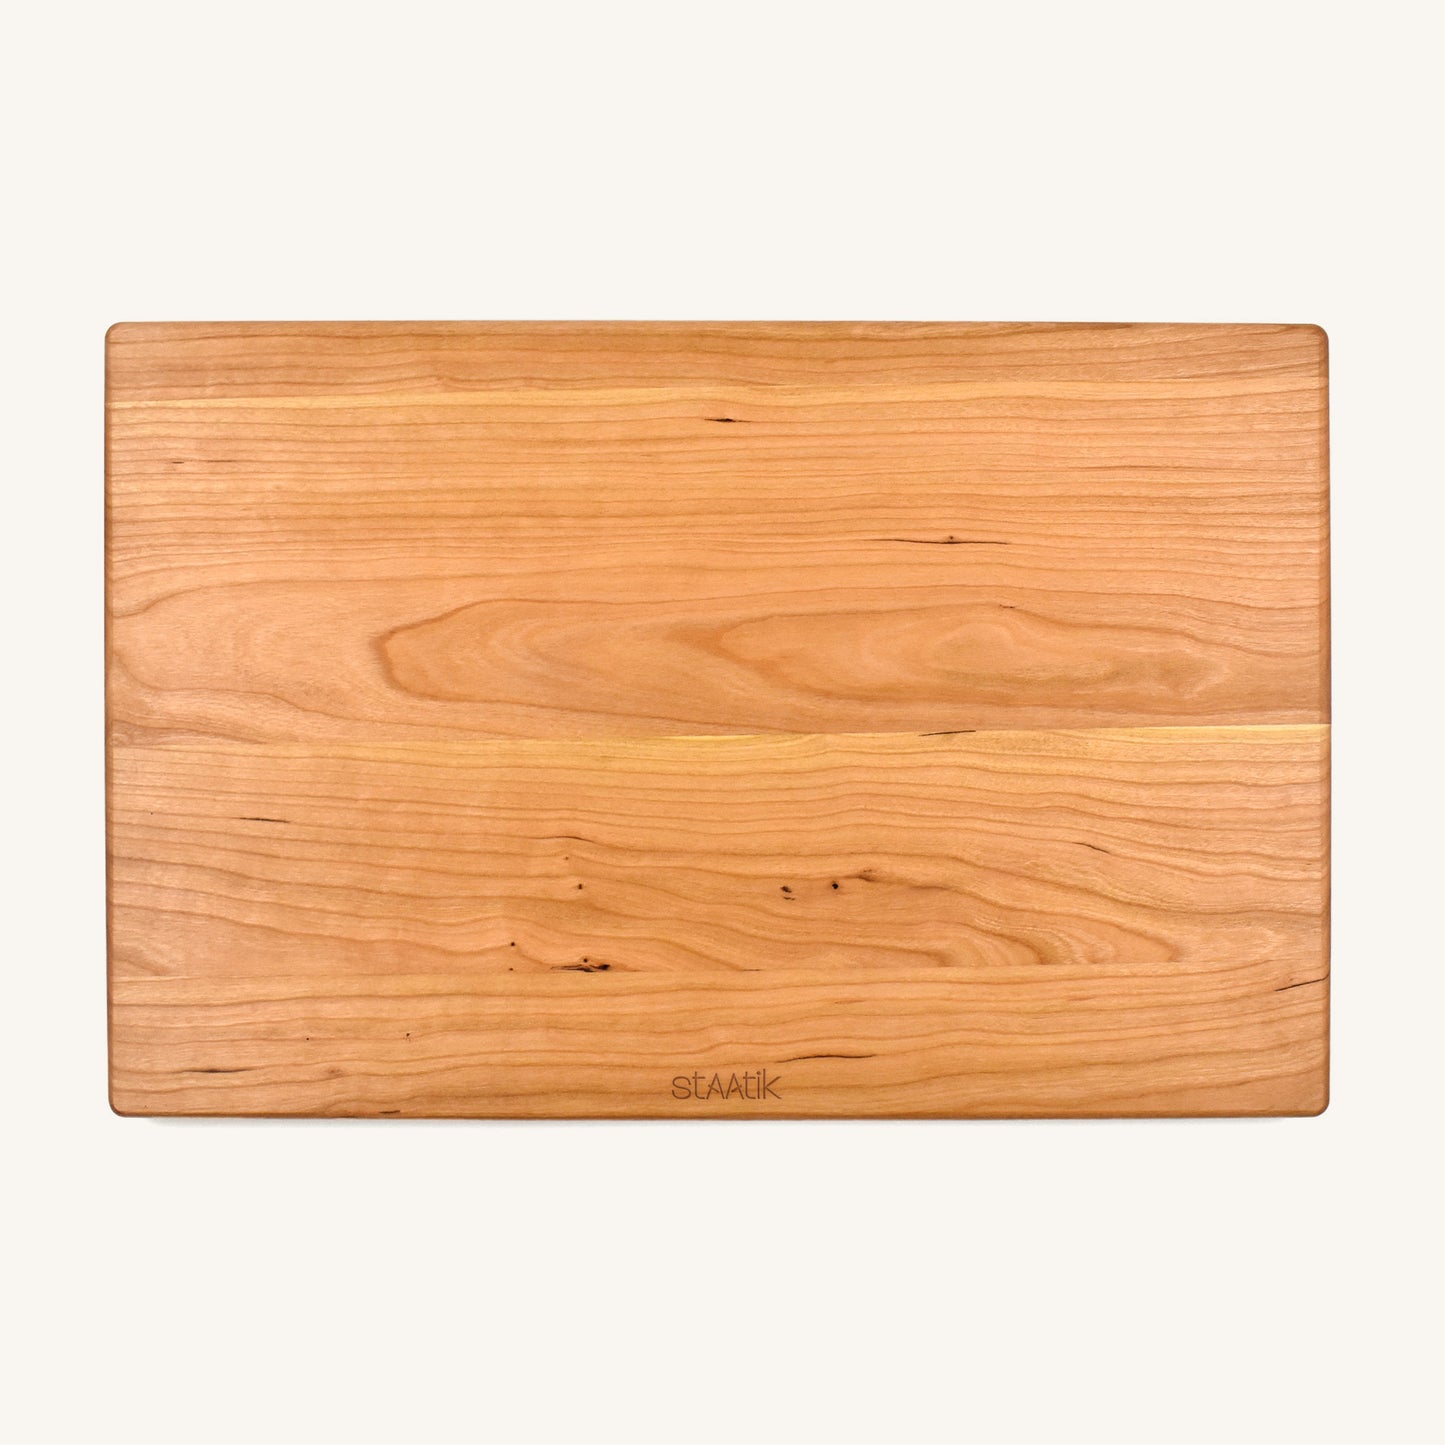 Thick Wood Cutting Board with Rounded Edges and Juice Groove